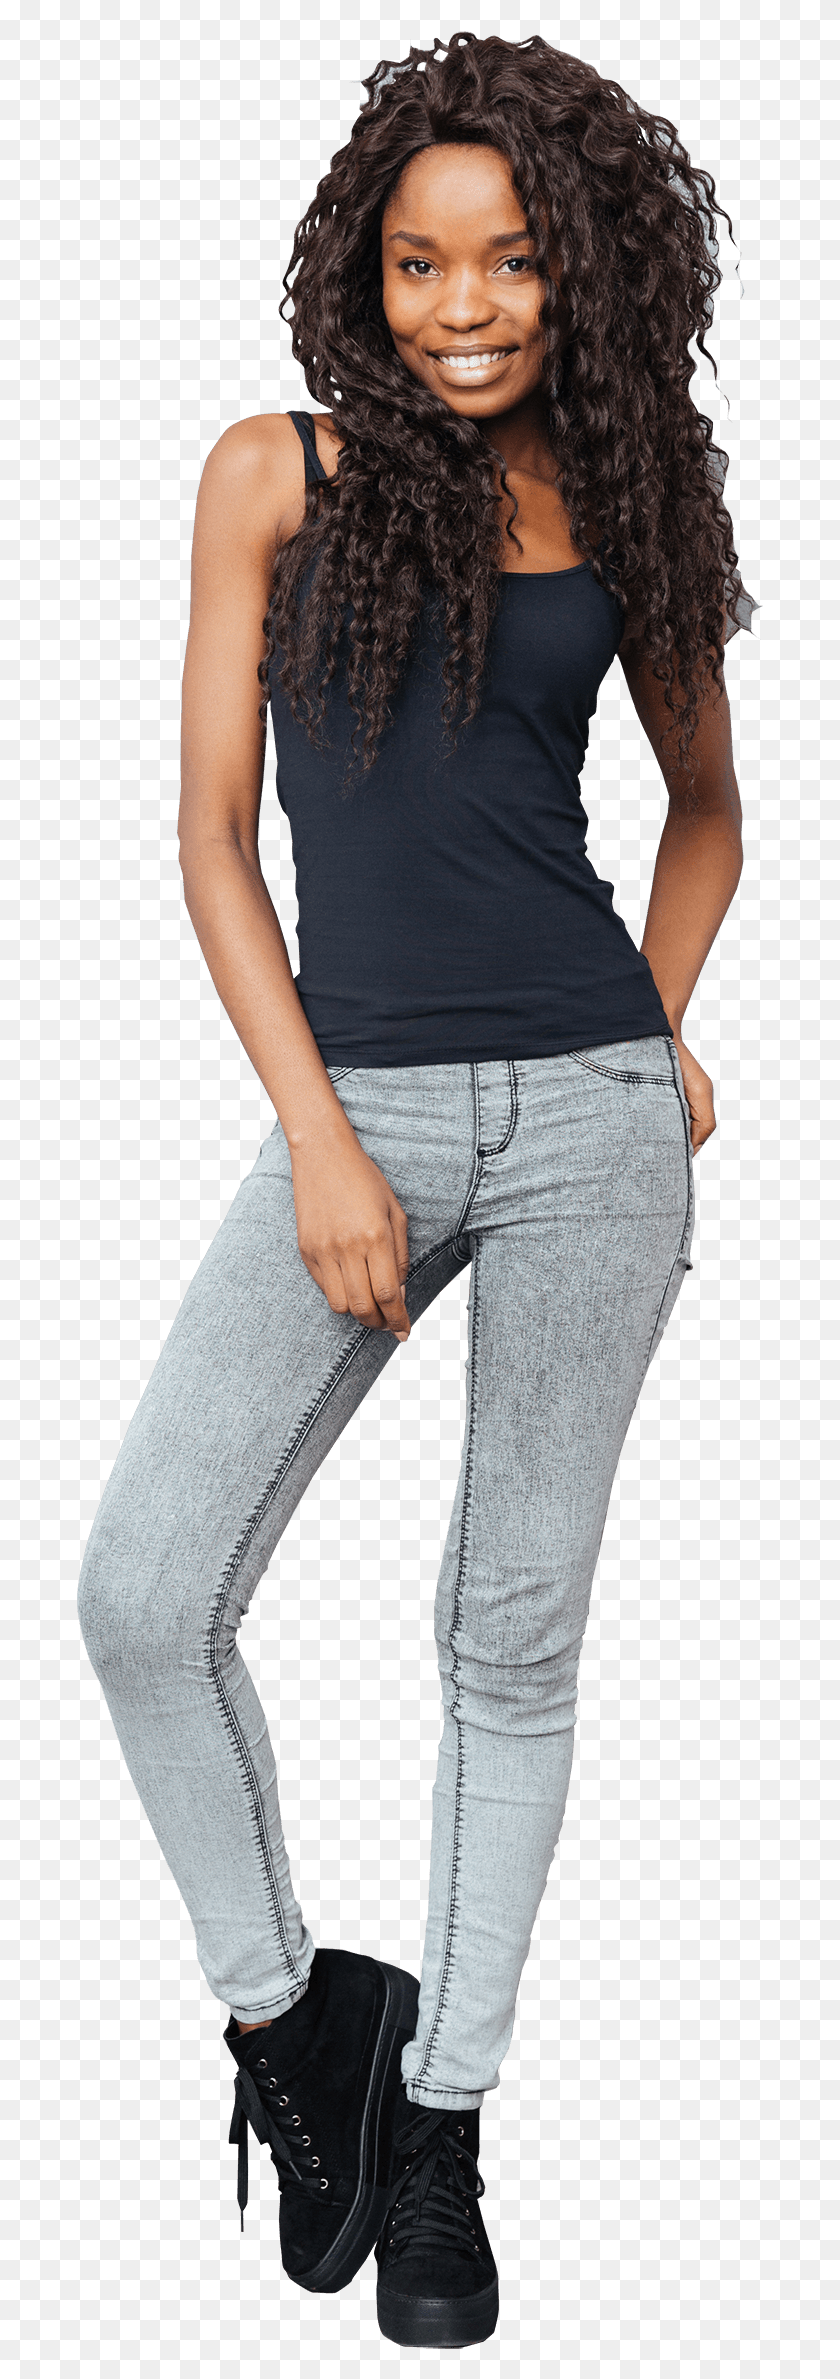 687x2319 Empower Young Women And Adolescent Girls Photo Shoot, Pants, Clothing, Apparel Descargar Hd Png